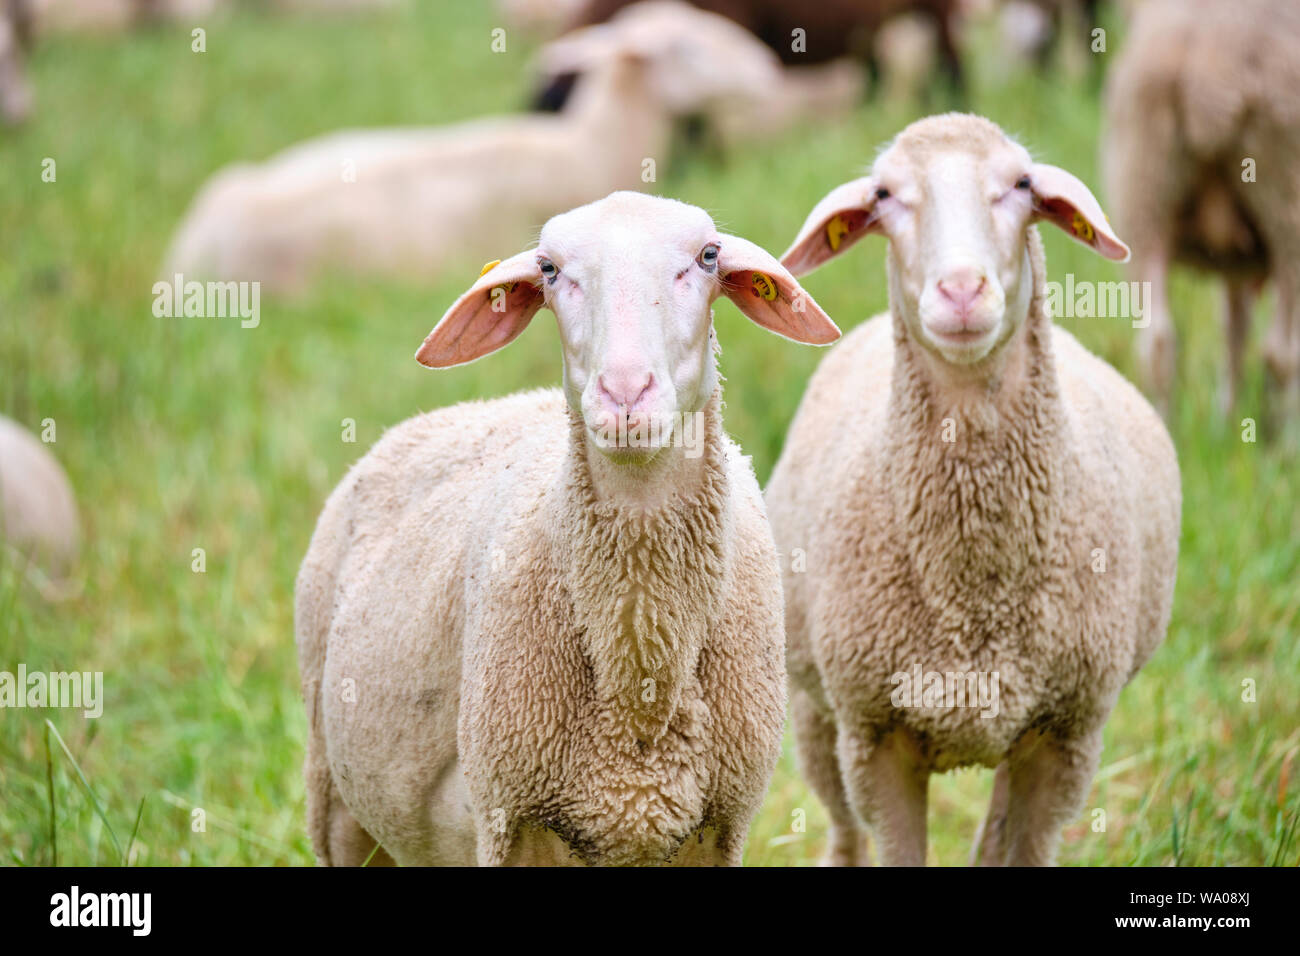 Sheeps grassing on a meadow Stock Photo